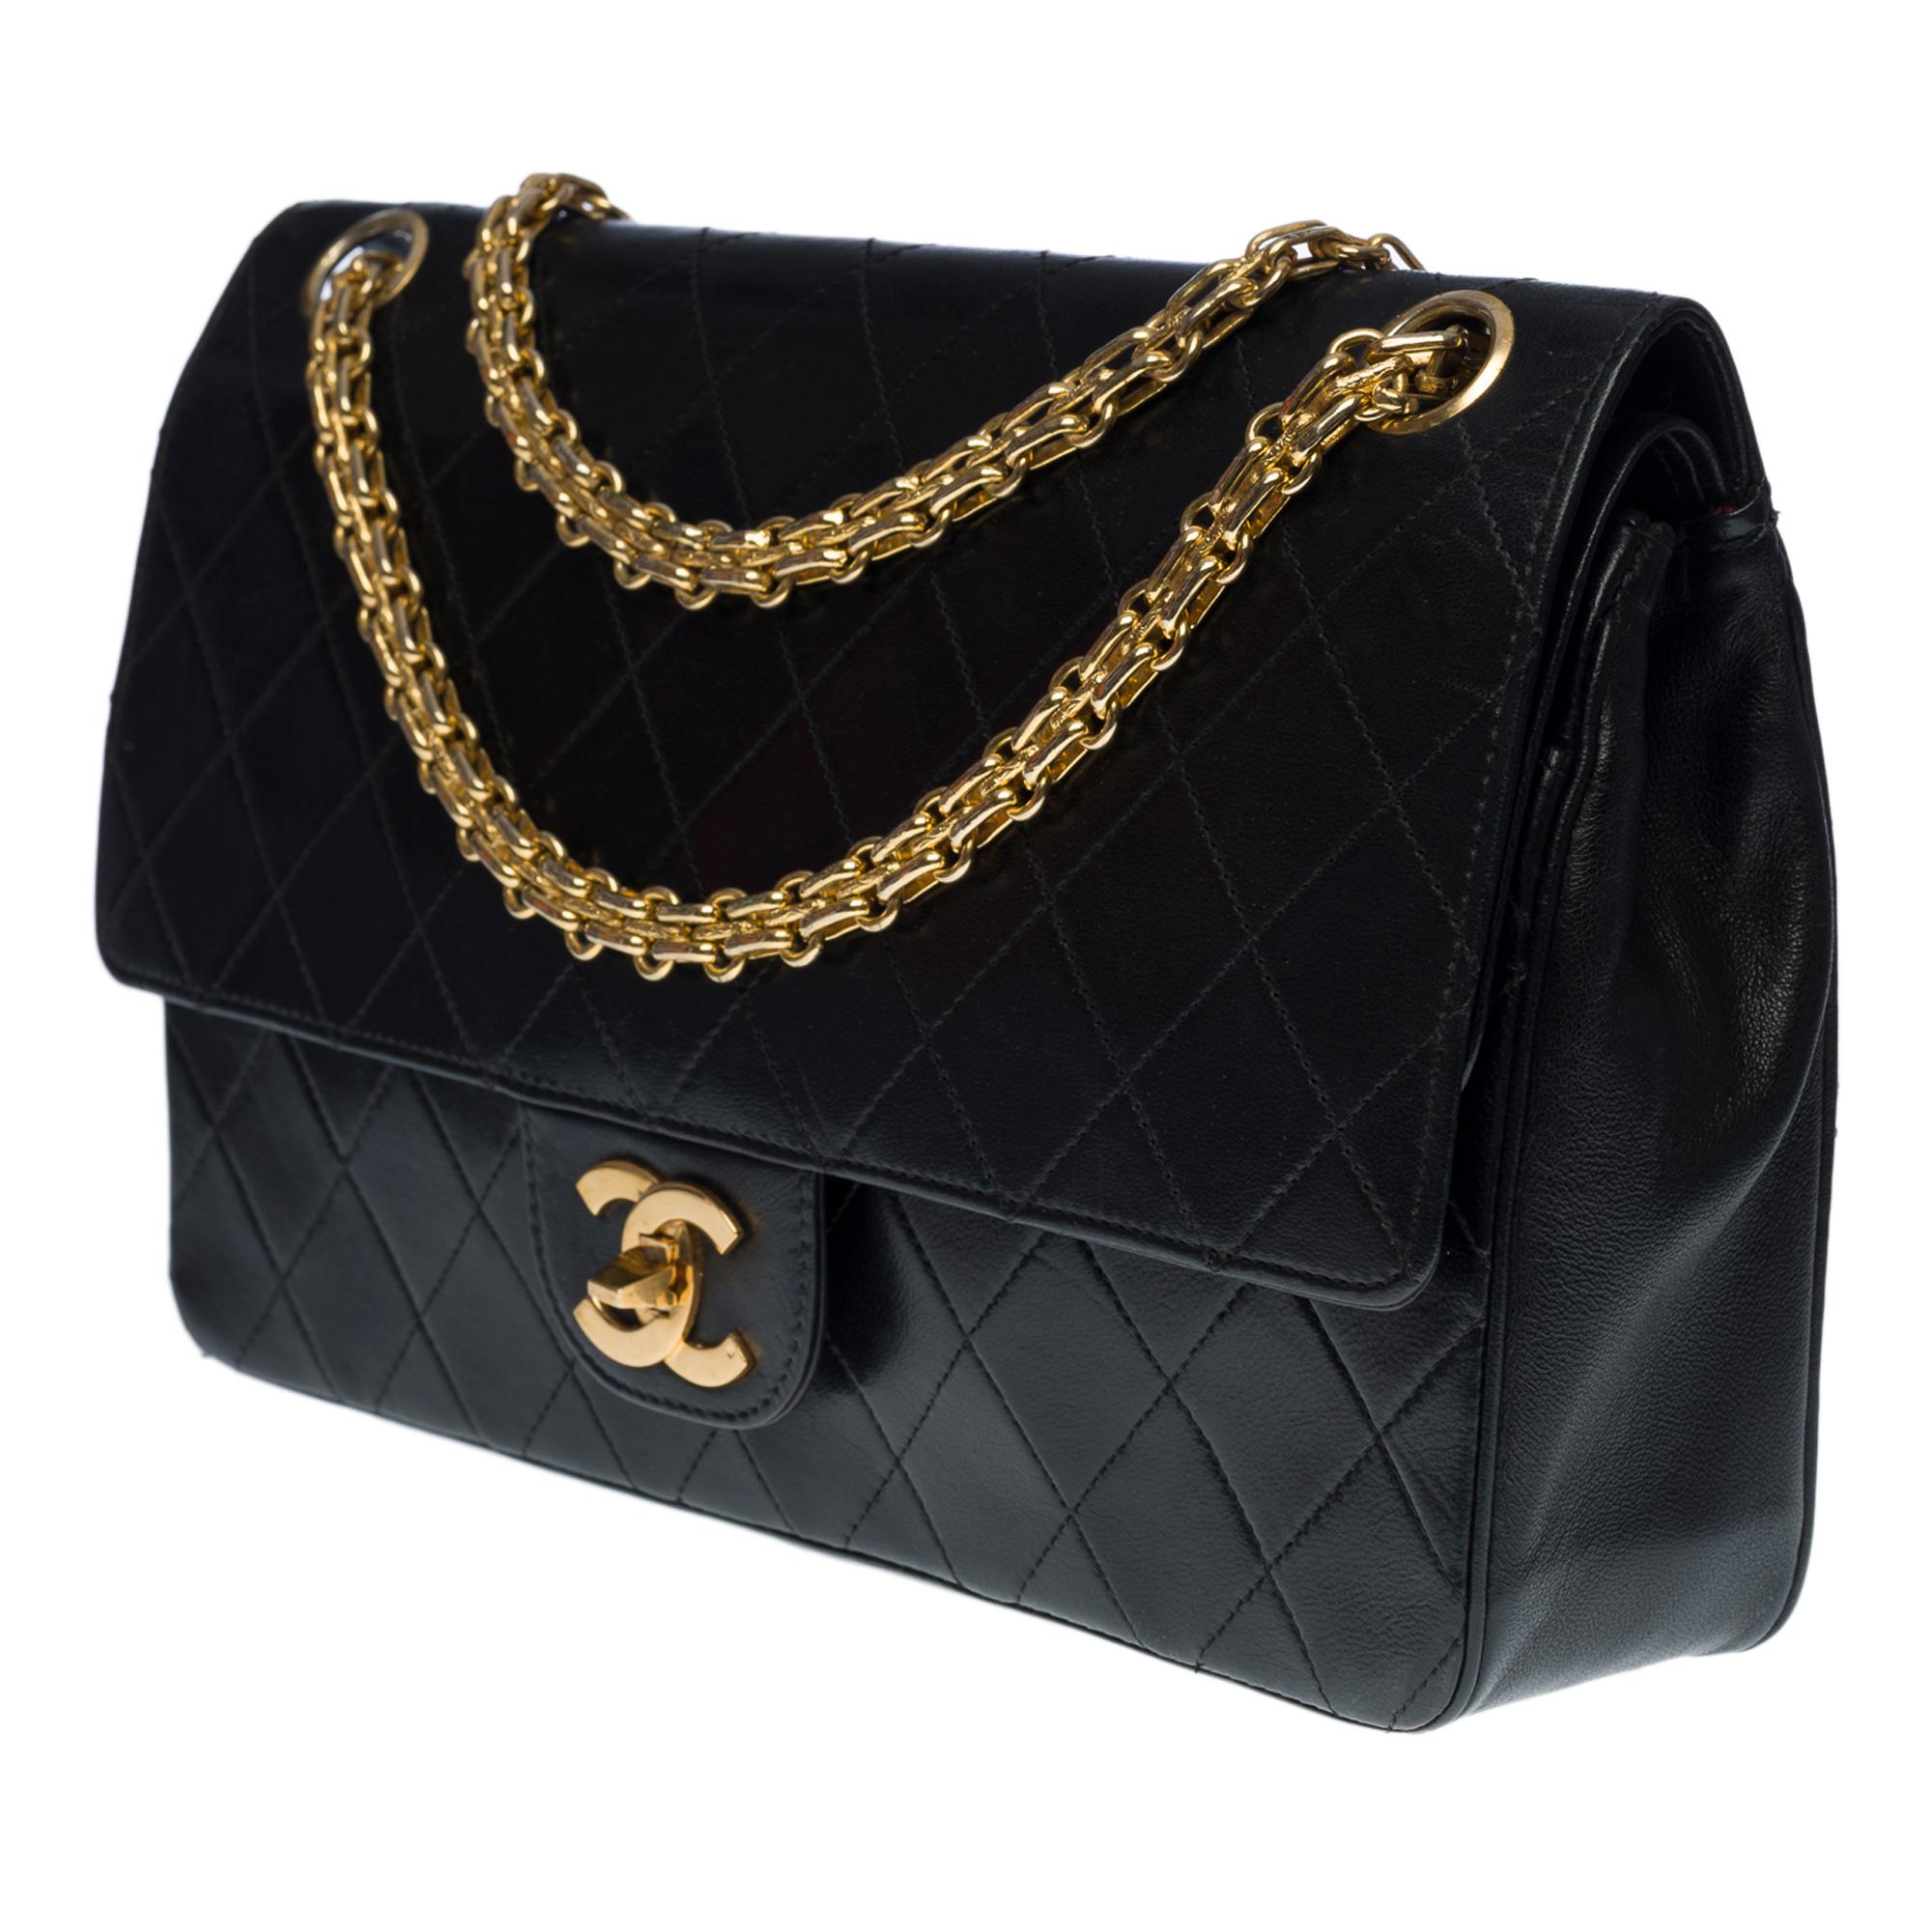 Black Chanel Timeless/Classic double flap shoulder bag in black quilted lambskin, GHW